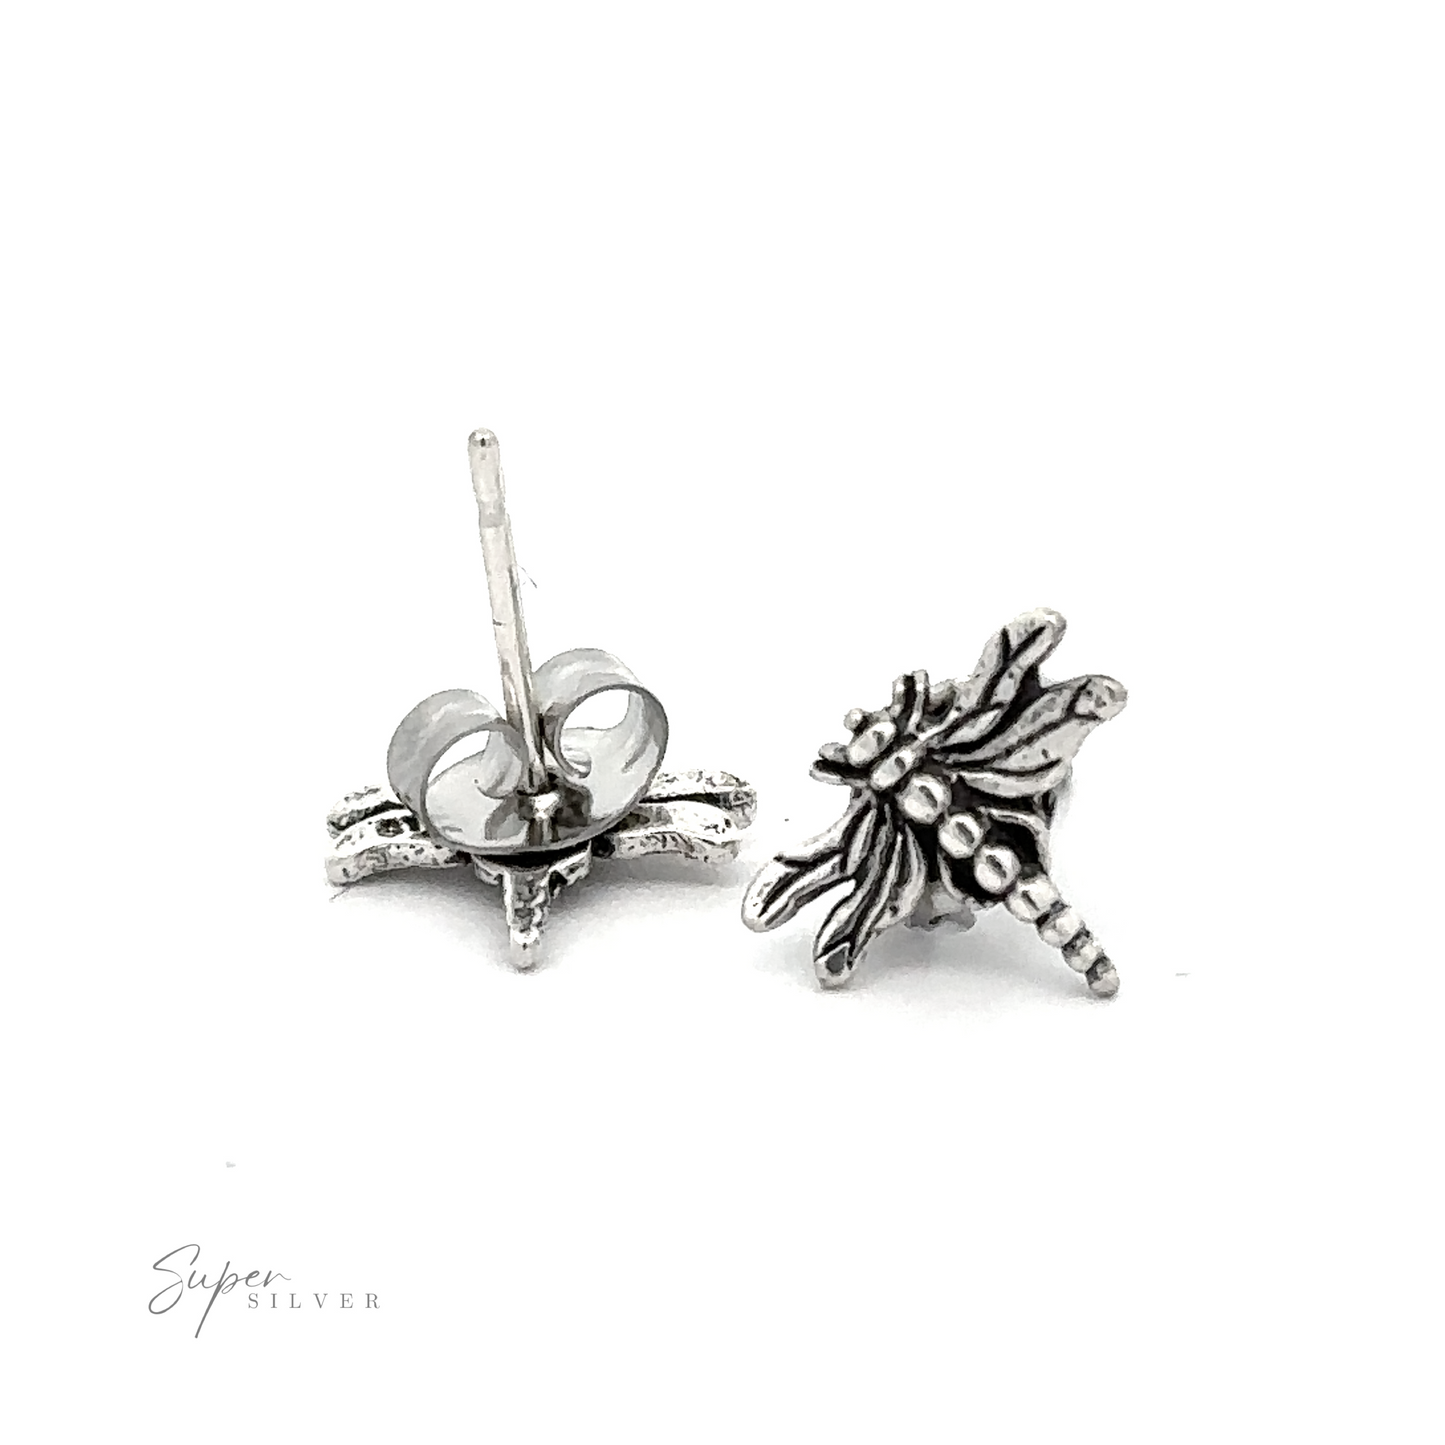 These silver Dragonfly Studs feature intricate wing designs and a detailed body.